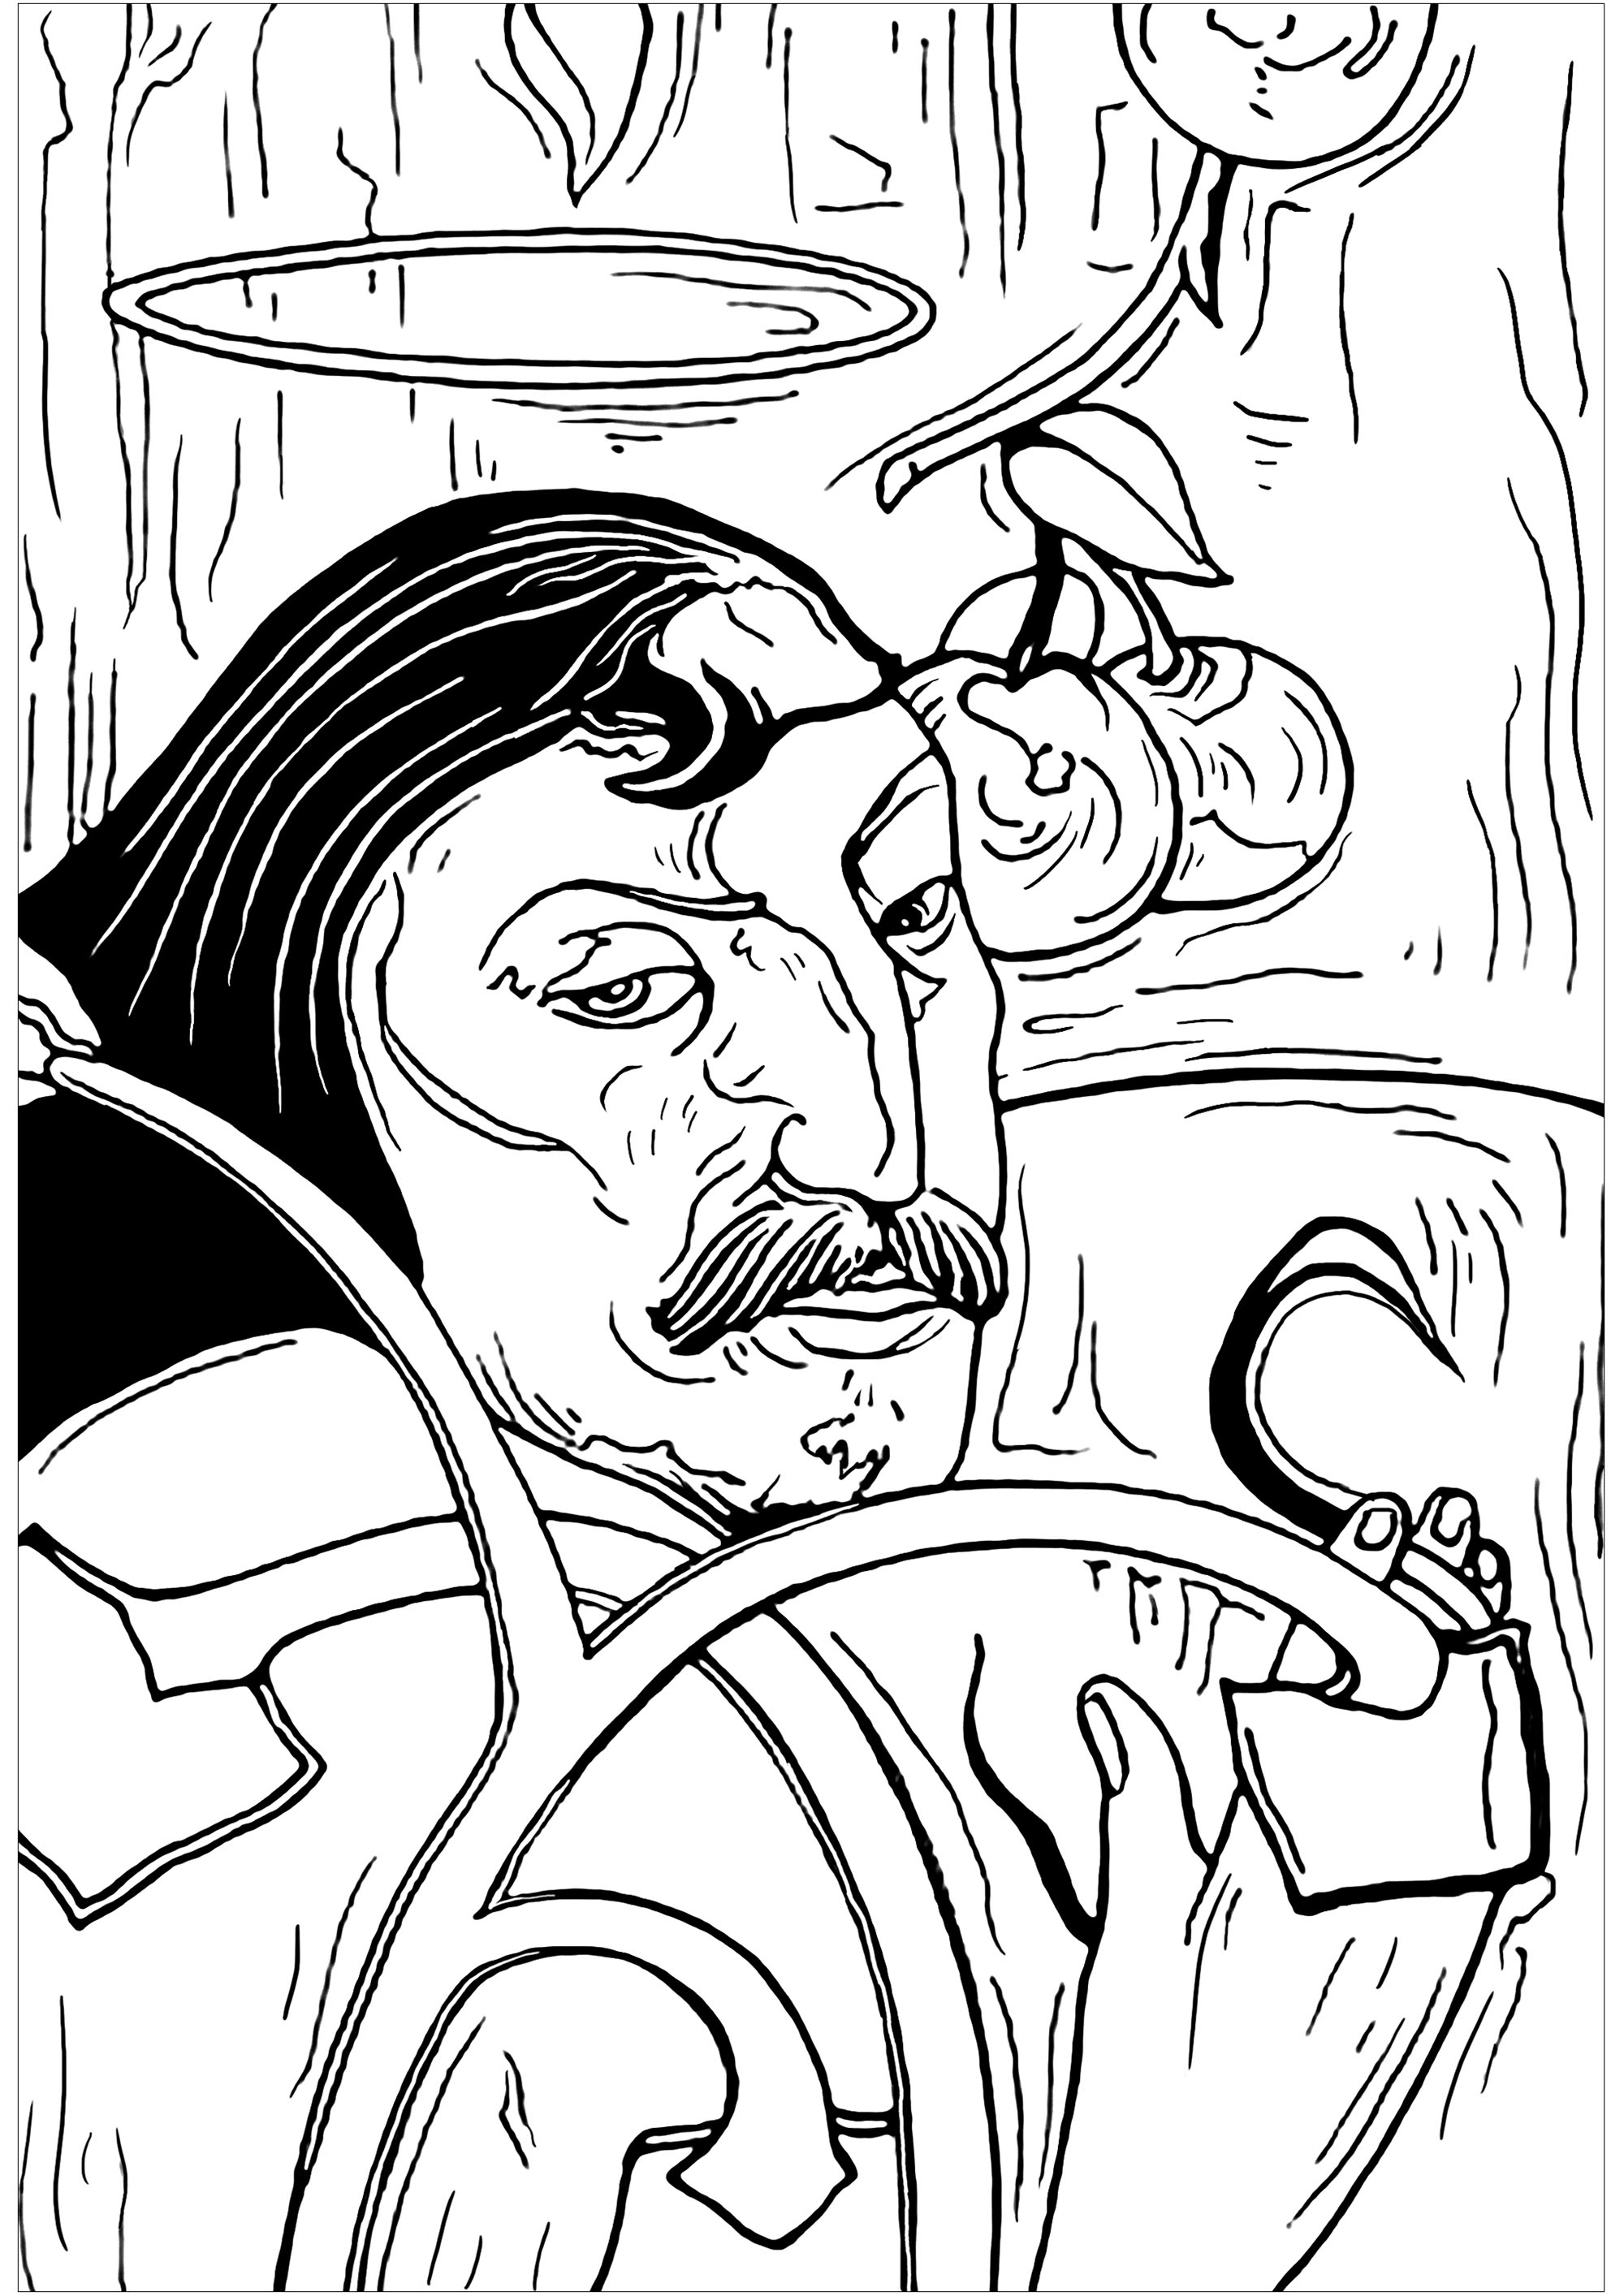 Paul gauguin - Coloring Pages for Adults